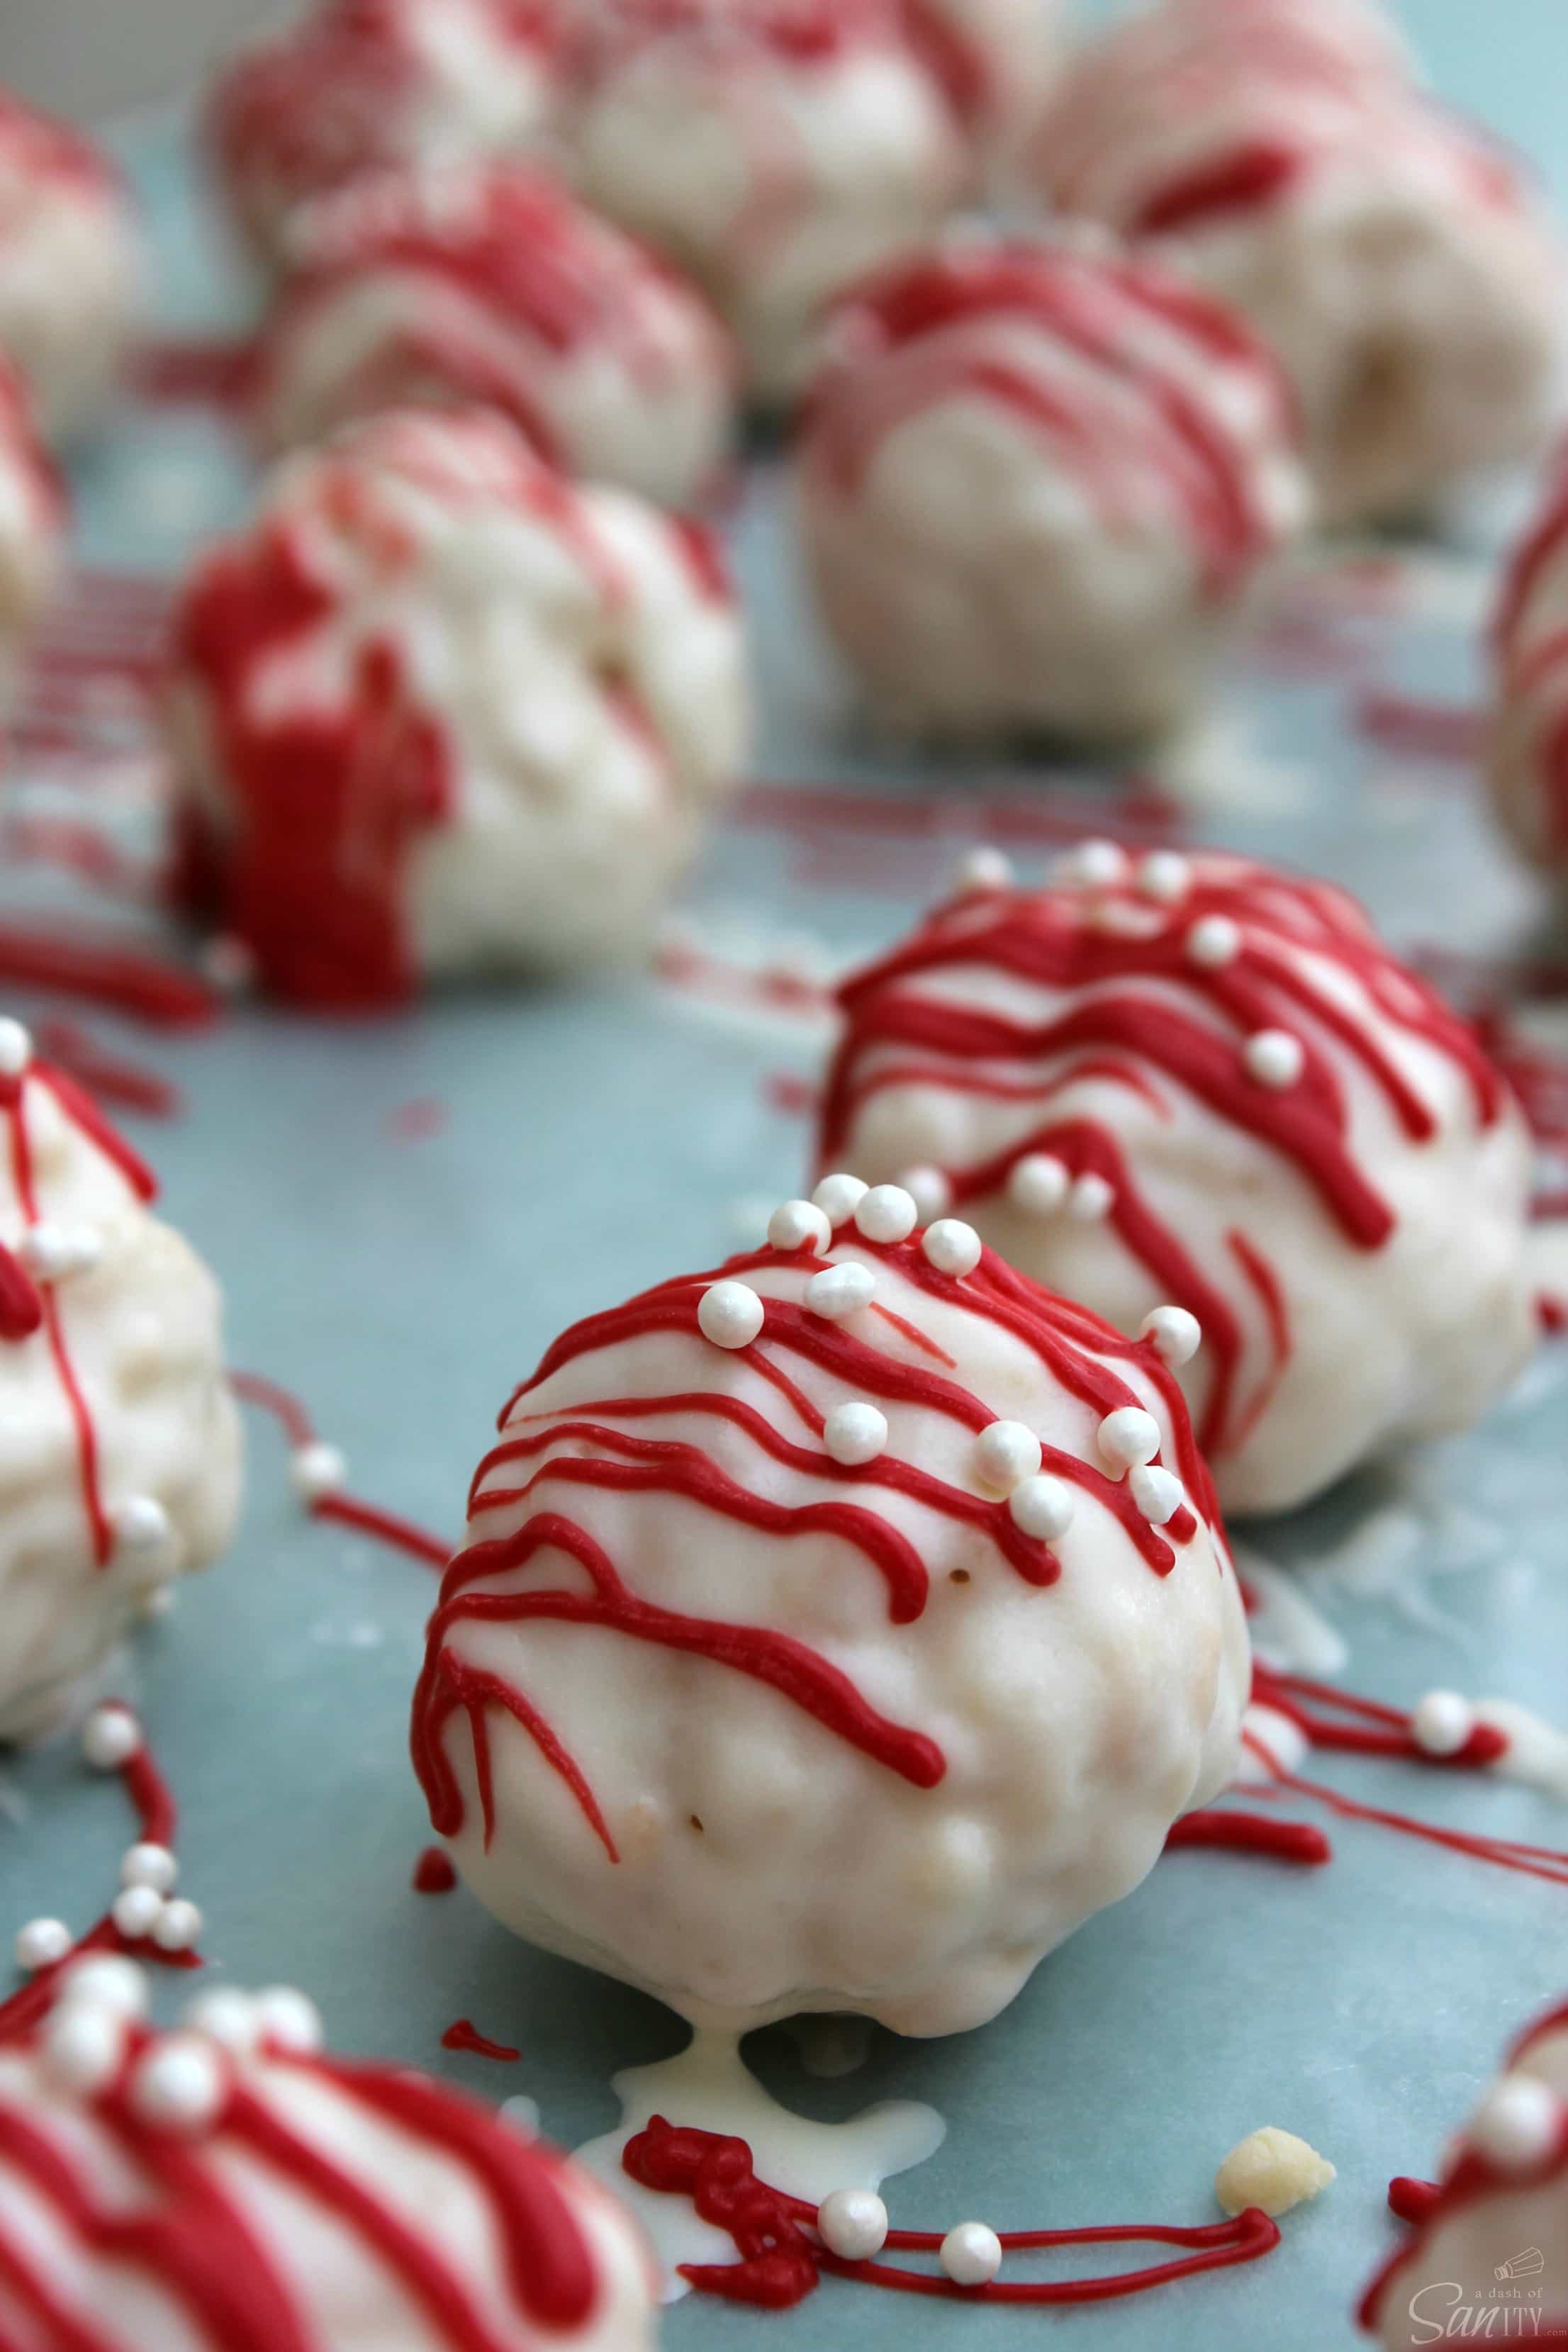 These White Chocolate Rice Krispies Pops are the perfect Valentine’s Day treat or an after school snack hit! Your kids will love to help make these treats.